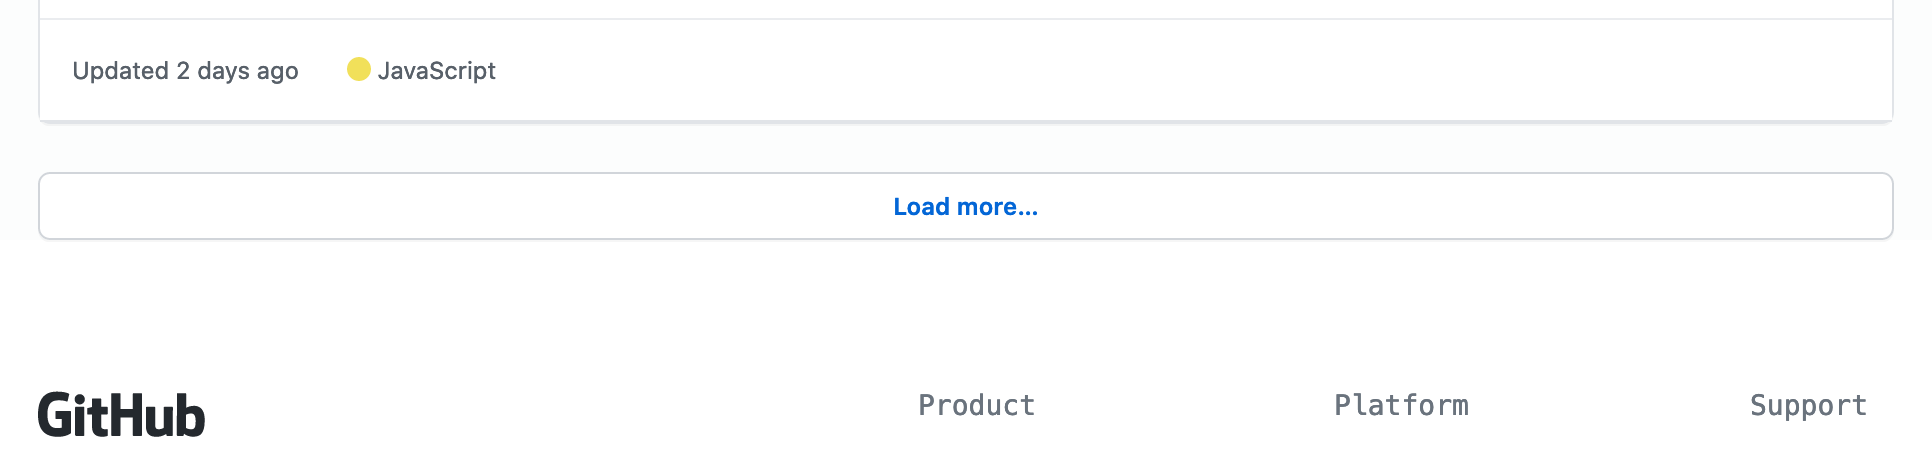 Load more button at the bottom of the GitHub page